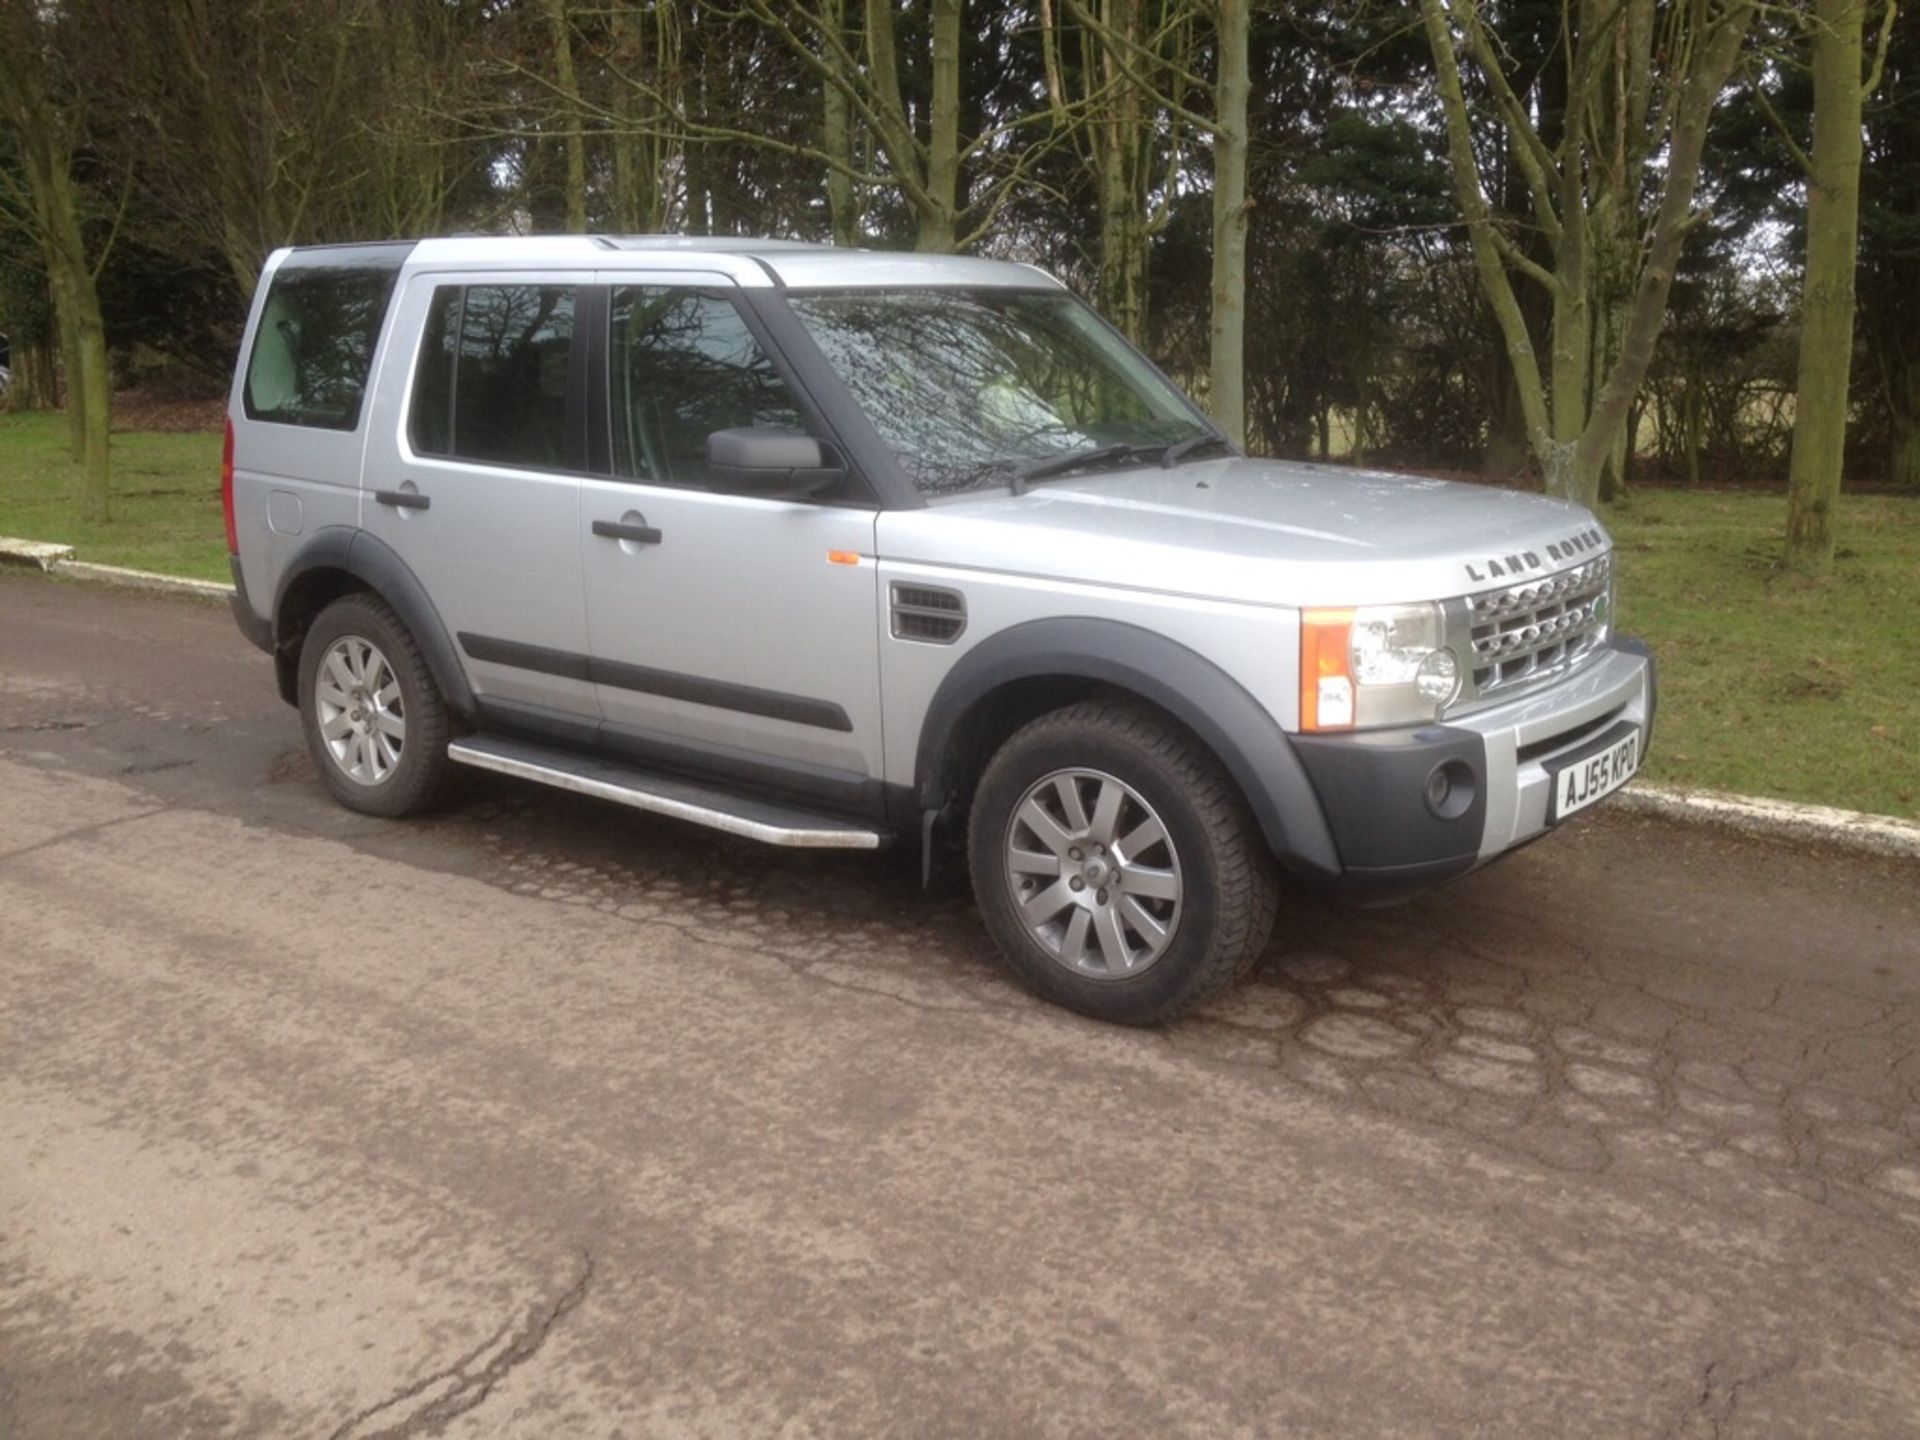 LAND ROVER DISCOVERY 4x4 2005 55 REG